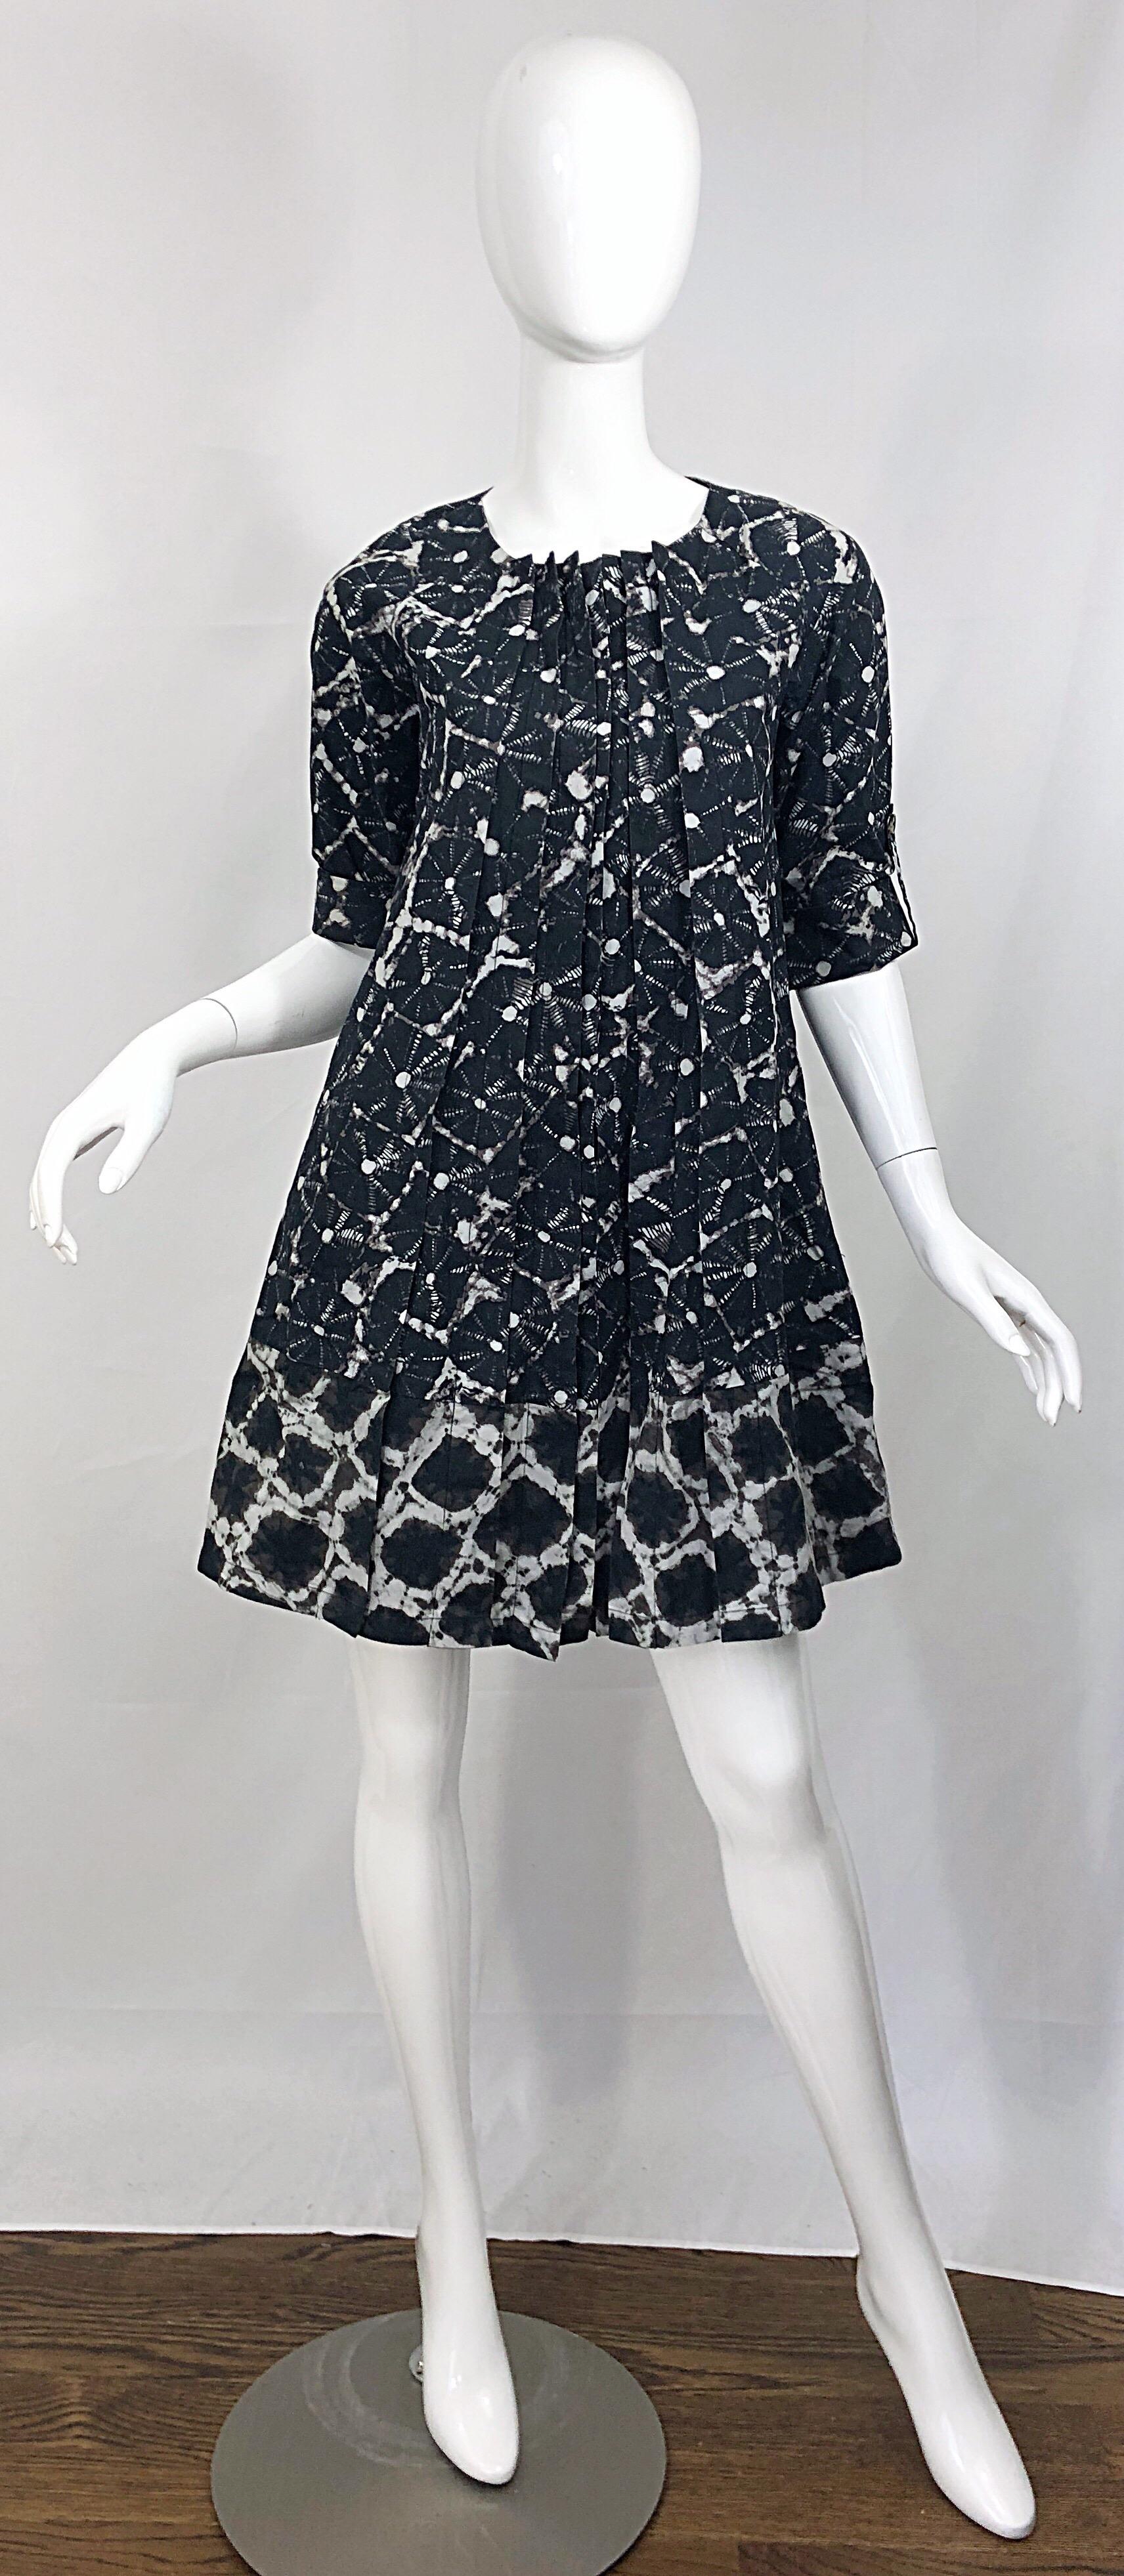 Thakoon Spring 2008 Black White Abstract Tie Dye Trapeze Swing Dress Jacket For Sale 7